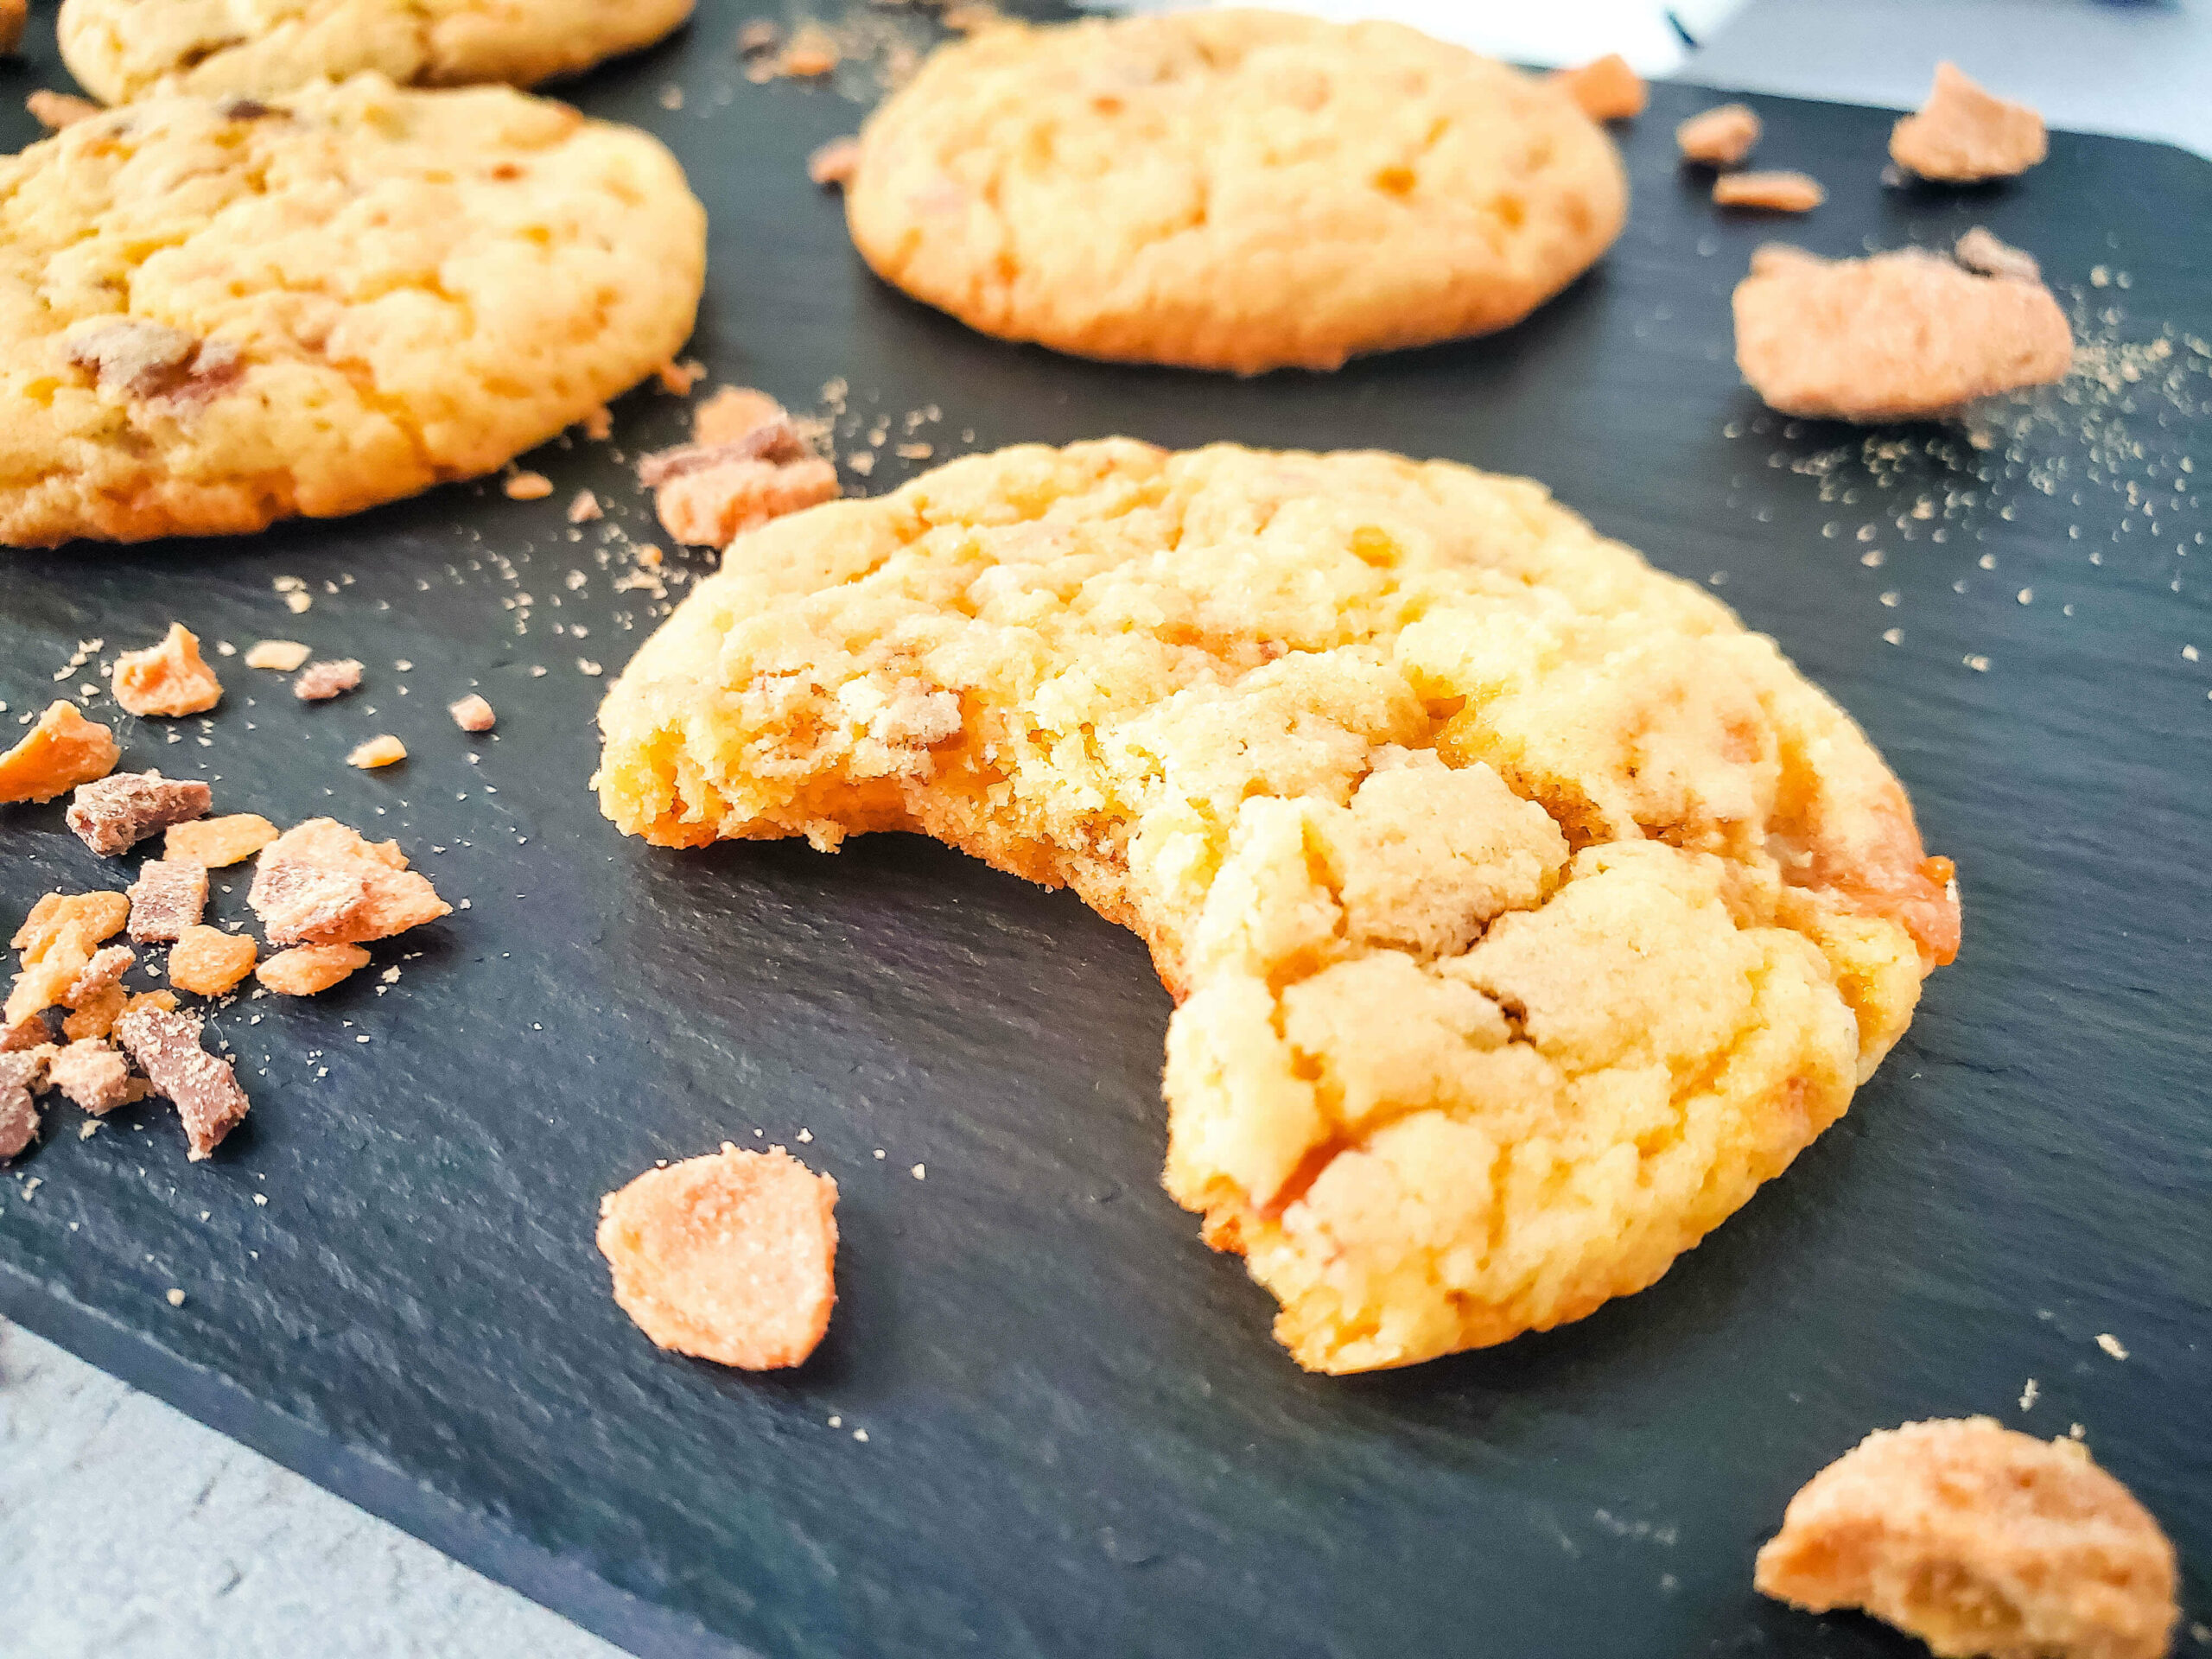 A butterfinger cookie with a bite taken out.